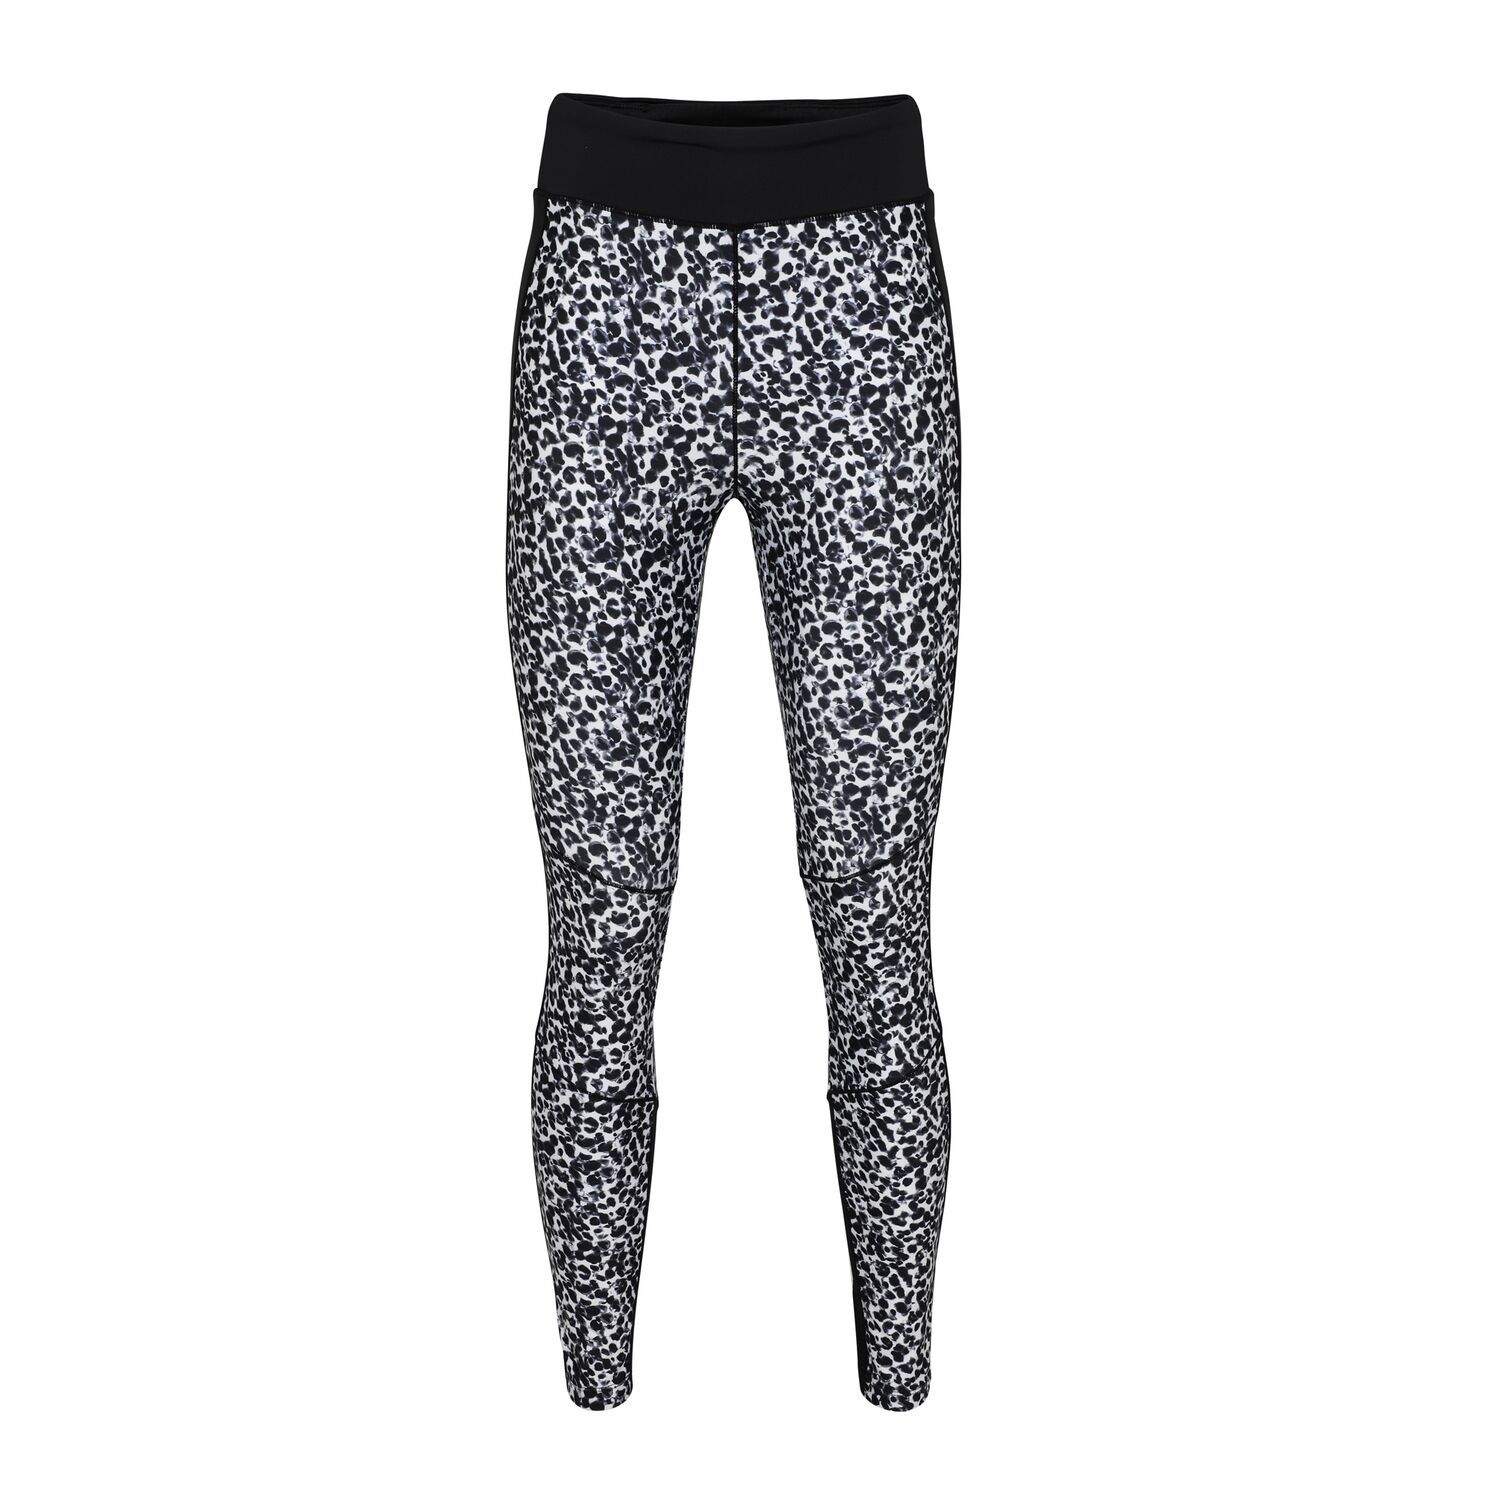 Material: 100% Polyester. Work out leggings made from Q-Wic lightweight fabric. Designed to mould to the body. Quick-drying and high-stretch. Flat locked seams and deep elasticated waistband for comfort.